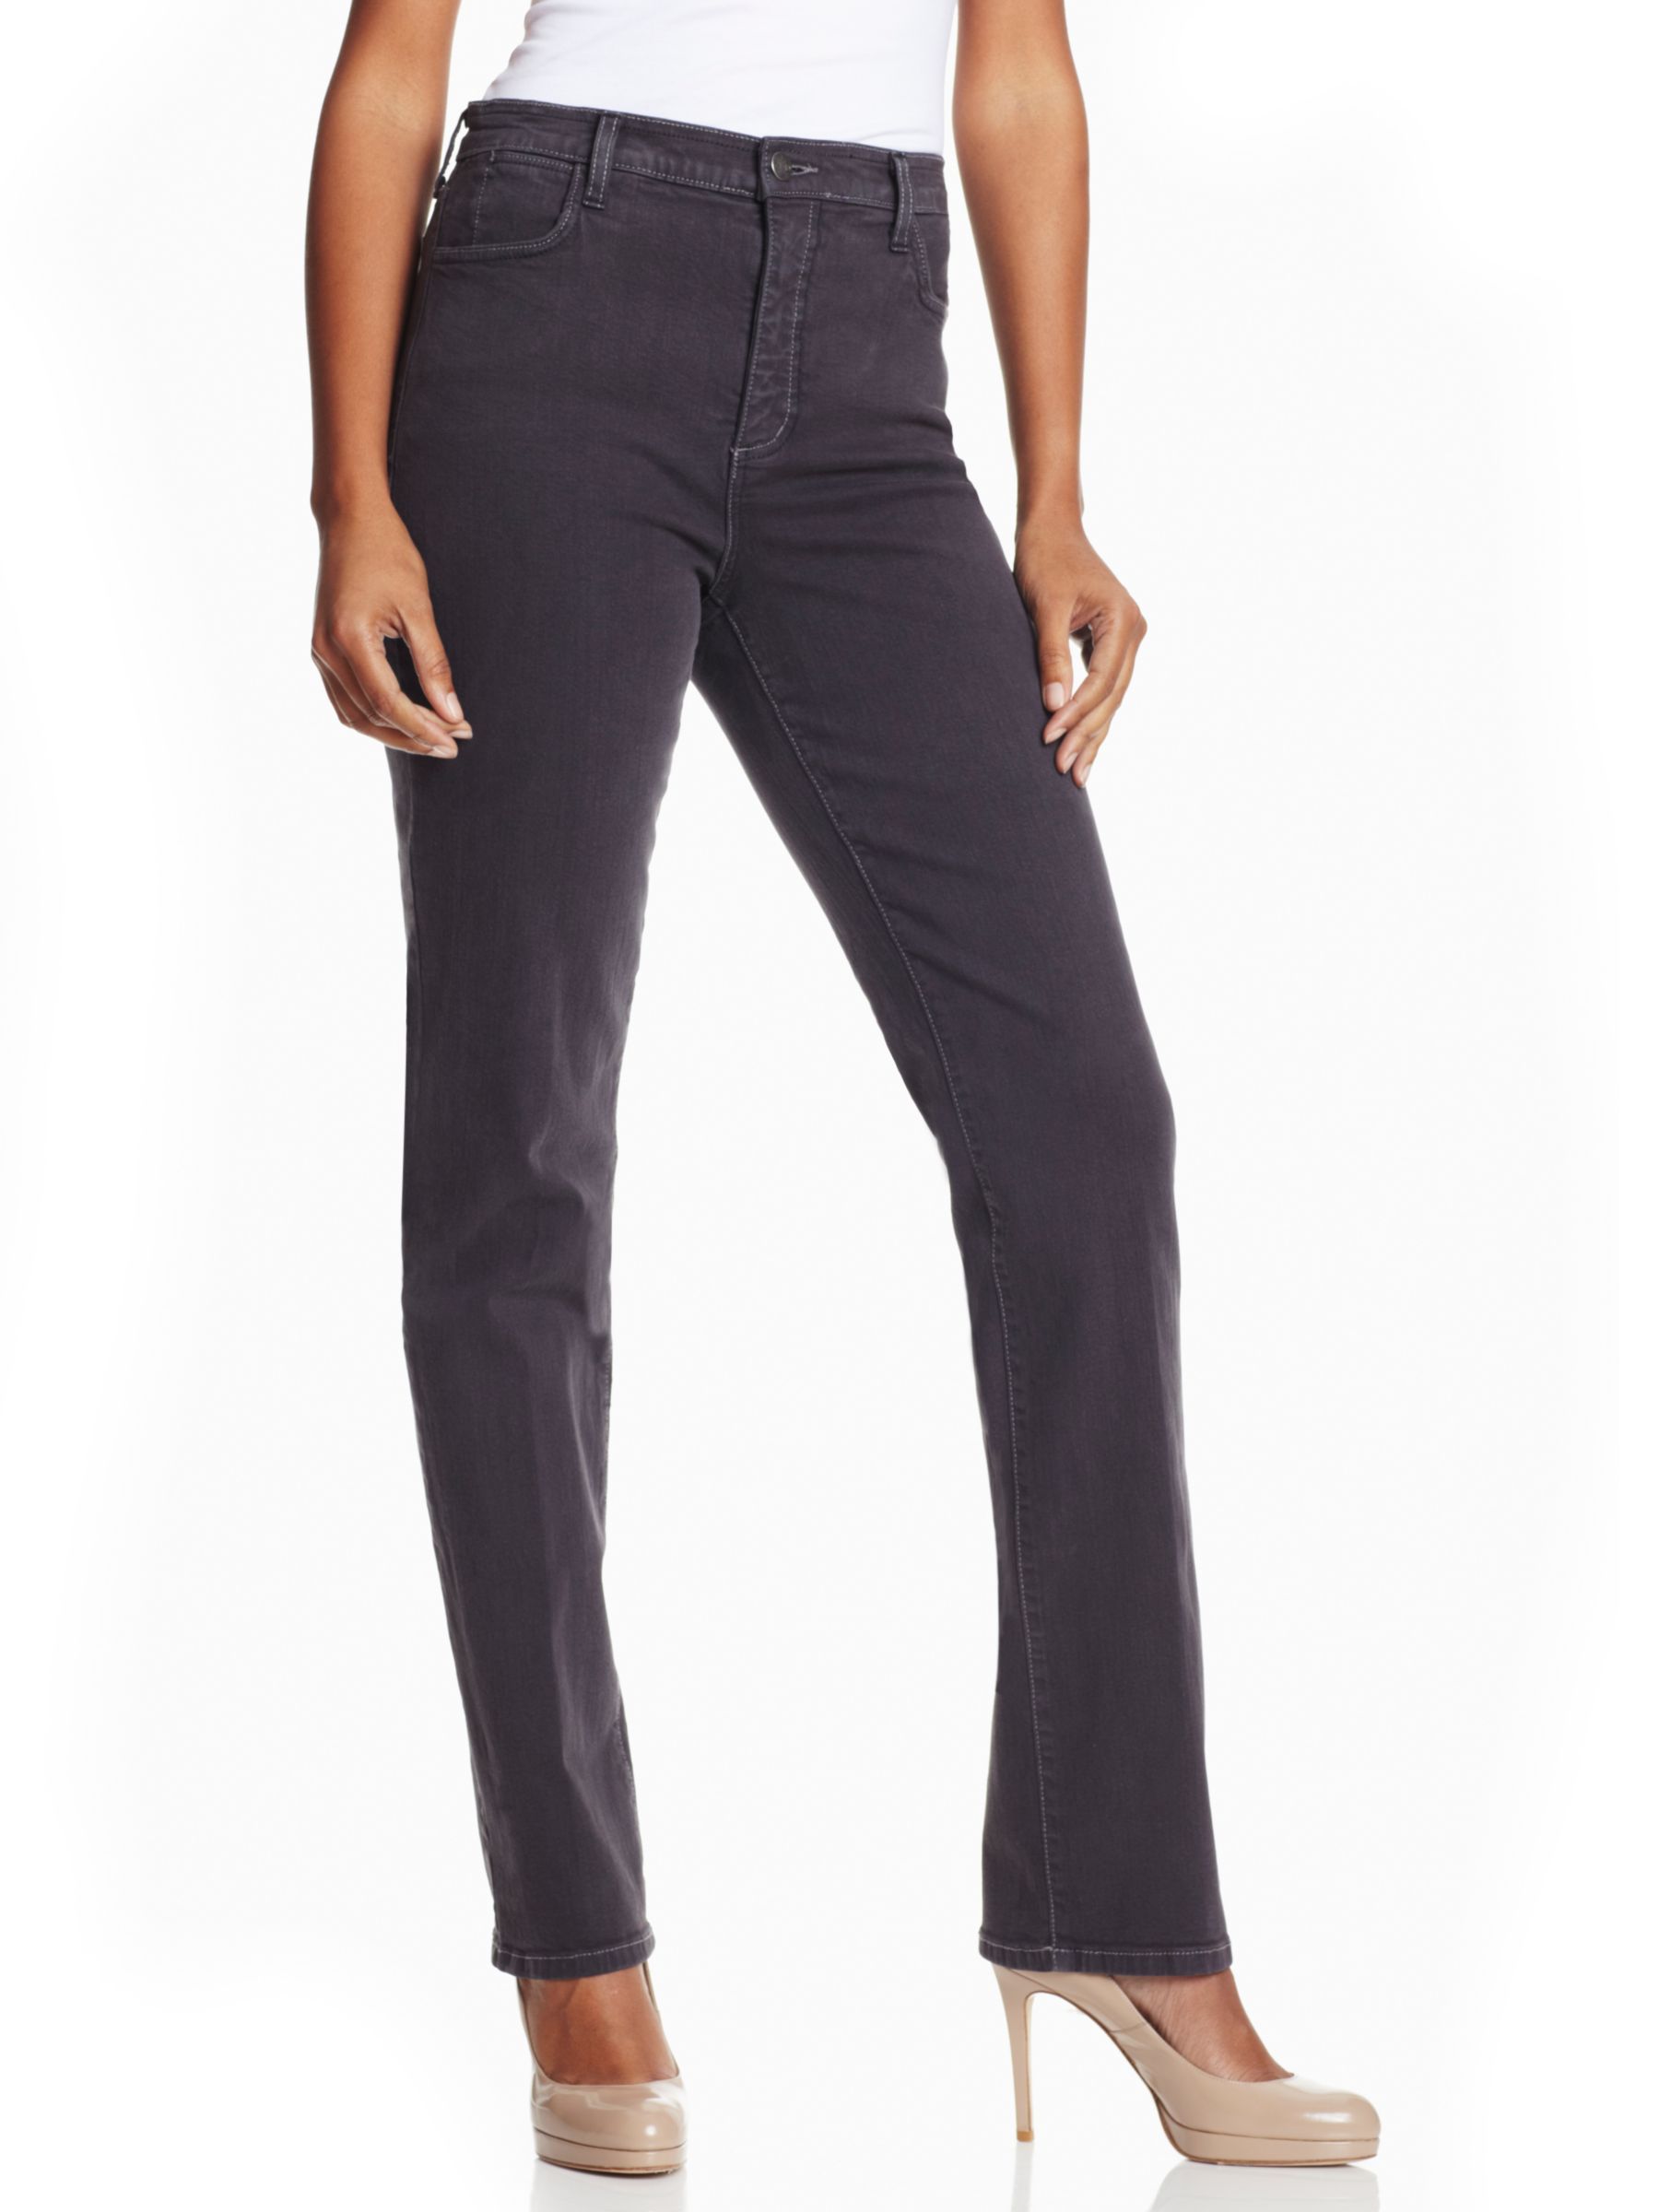 Not Your Daughter's Jeans Embellished Skinny Leg Trousers, Grey at John Lewis